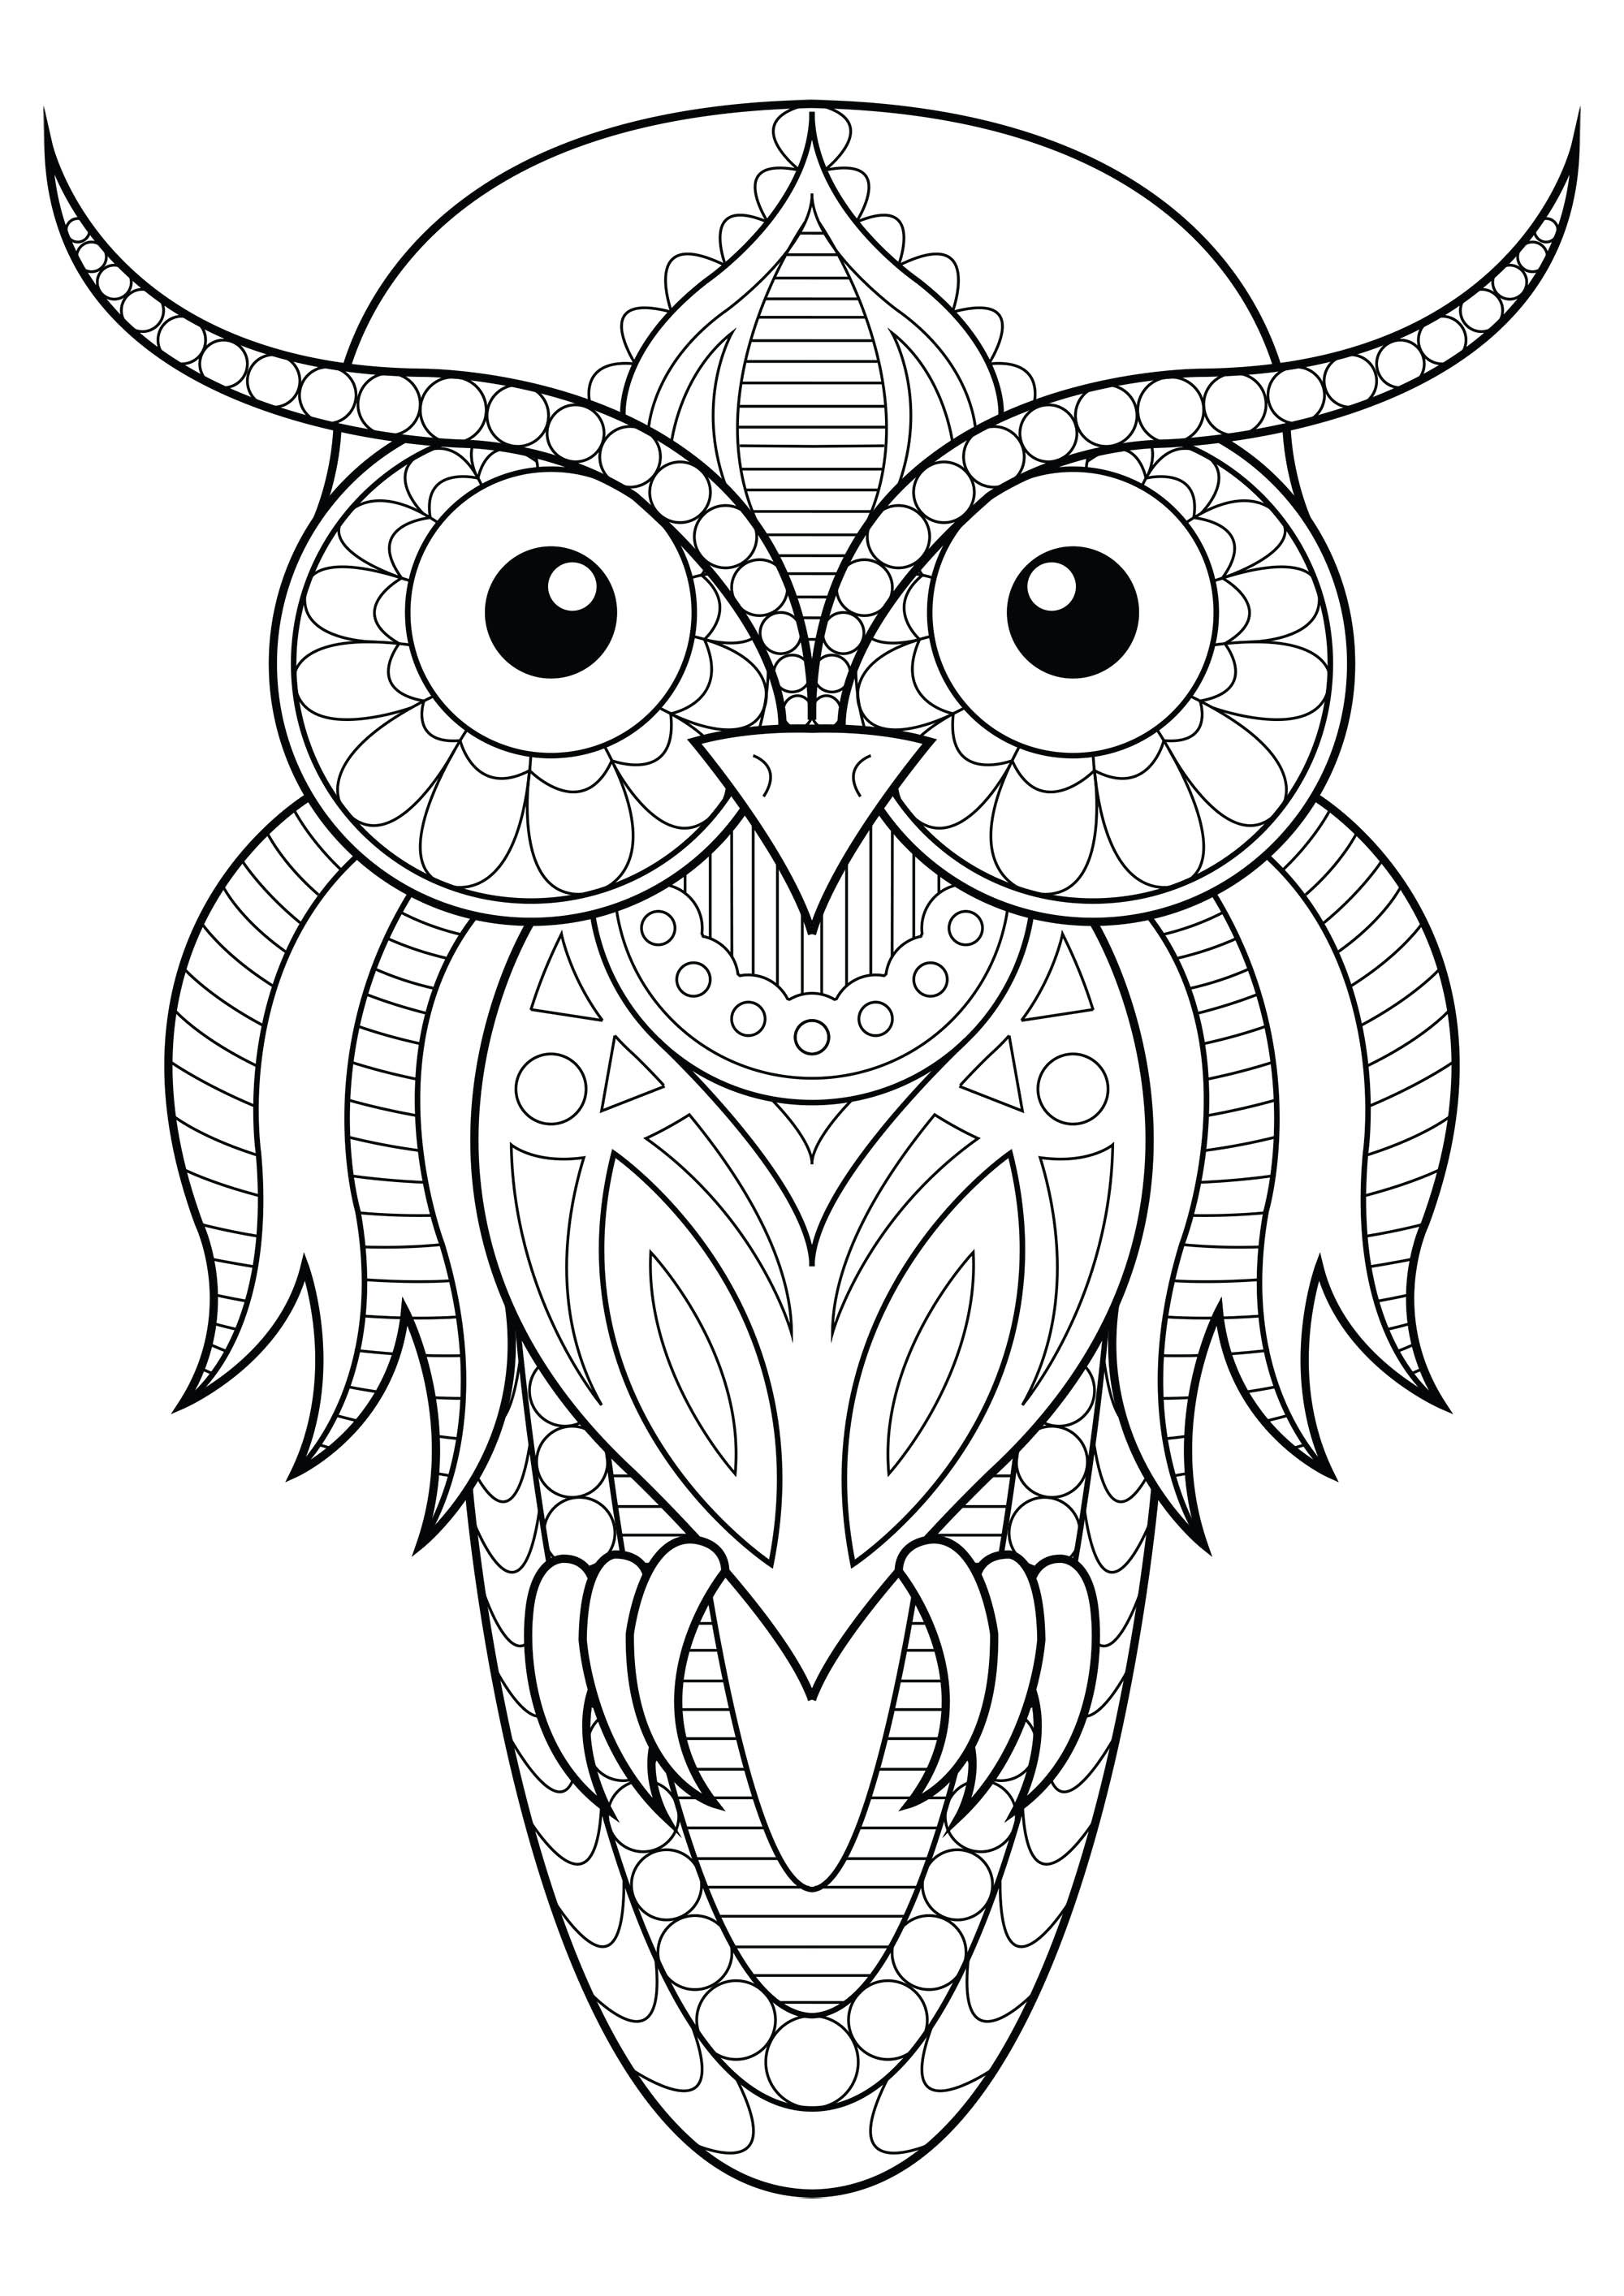 Download Owl simple patterns 1 - Owls Adult Coloring Pages